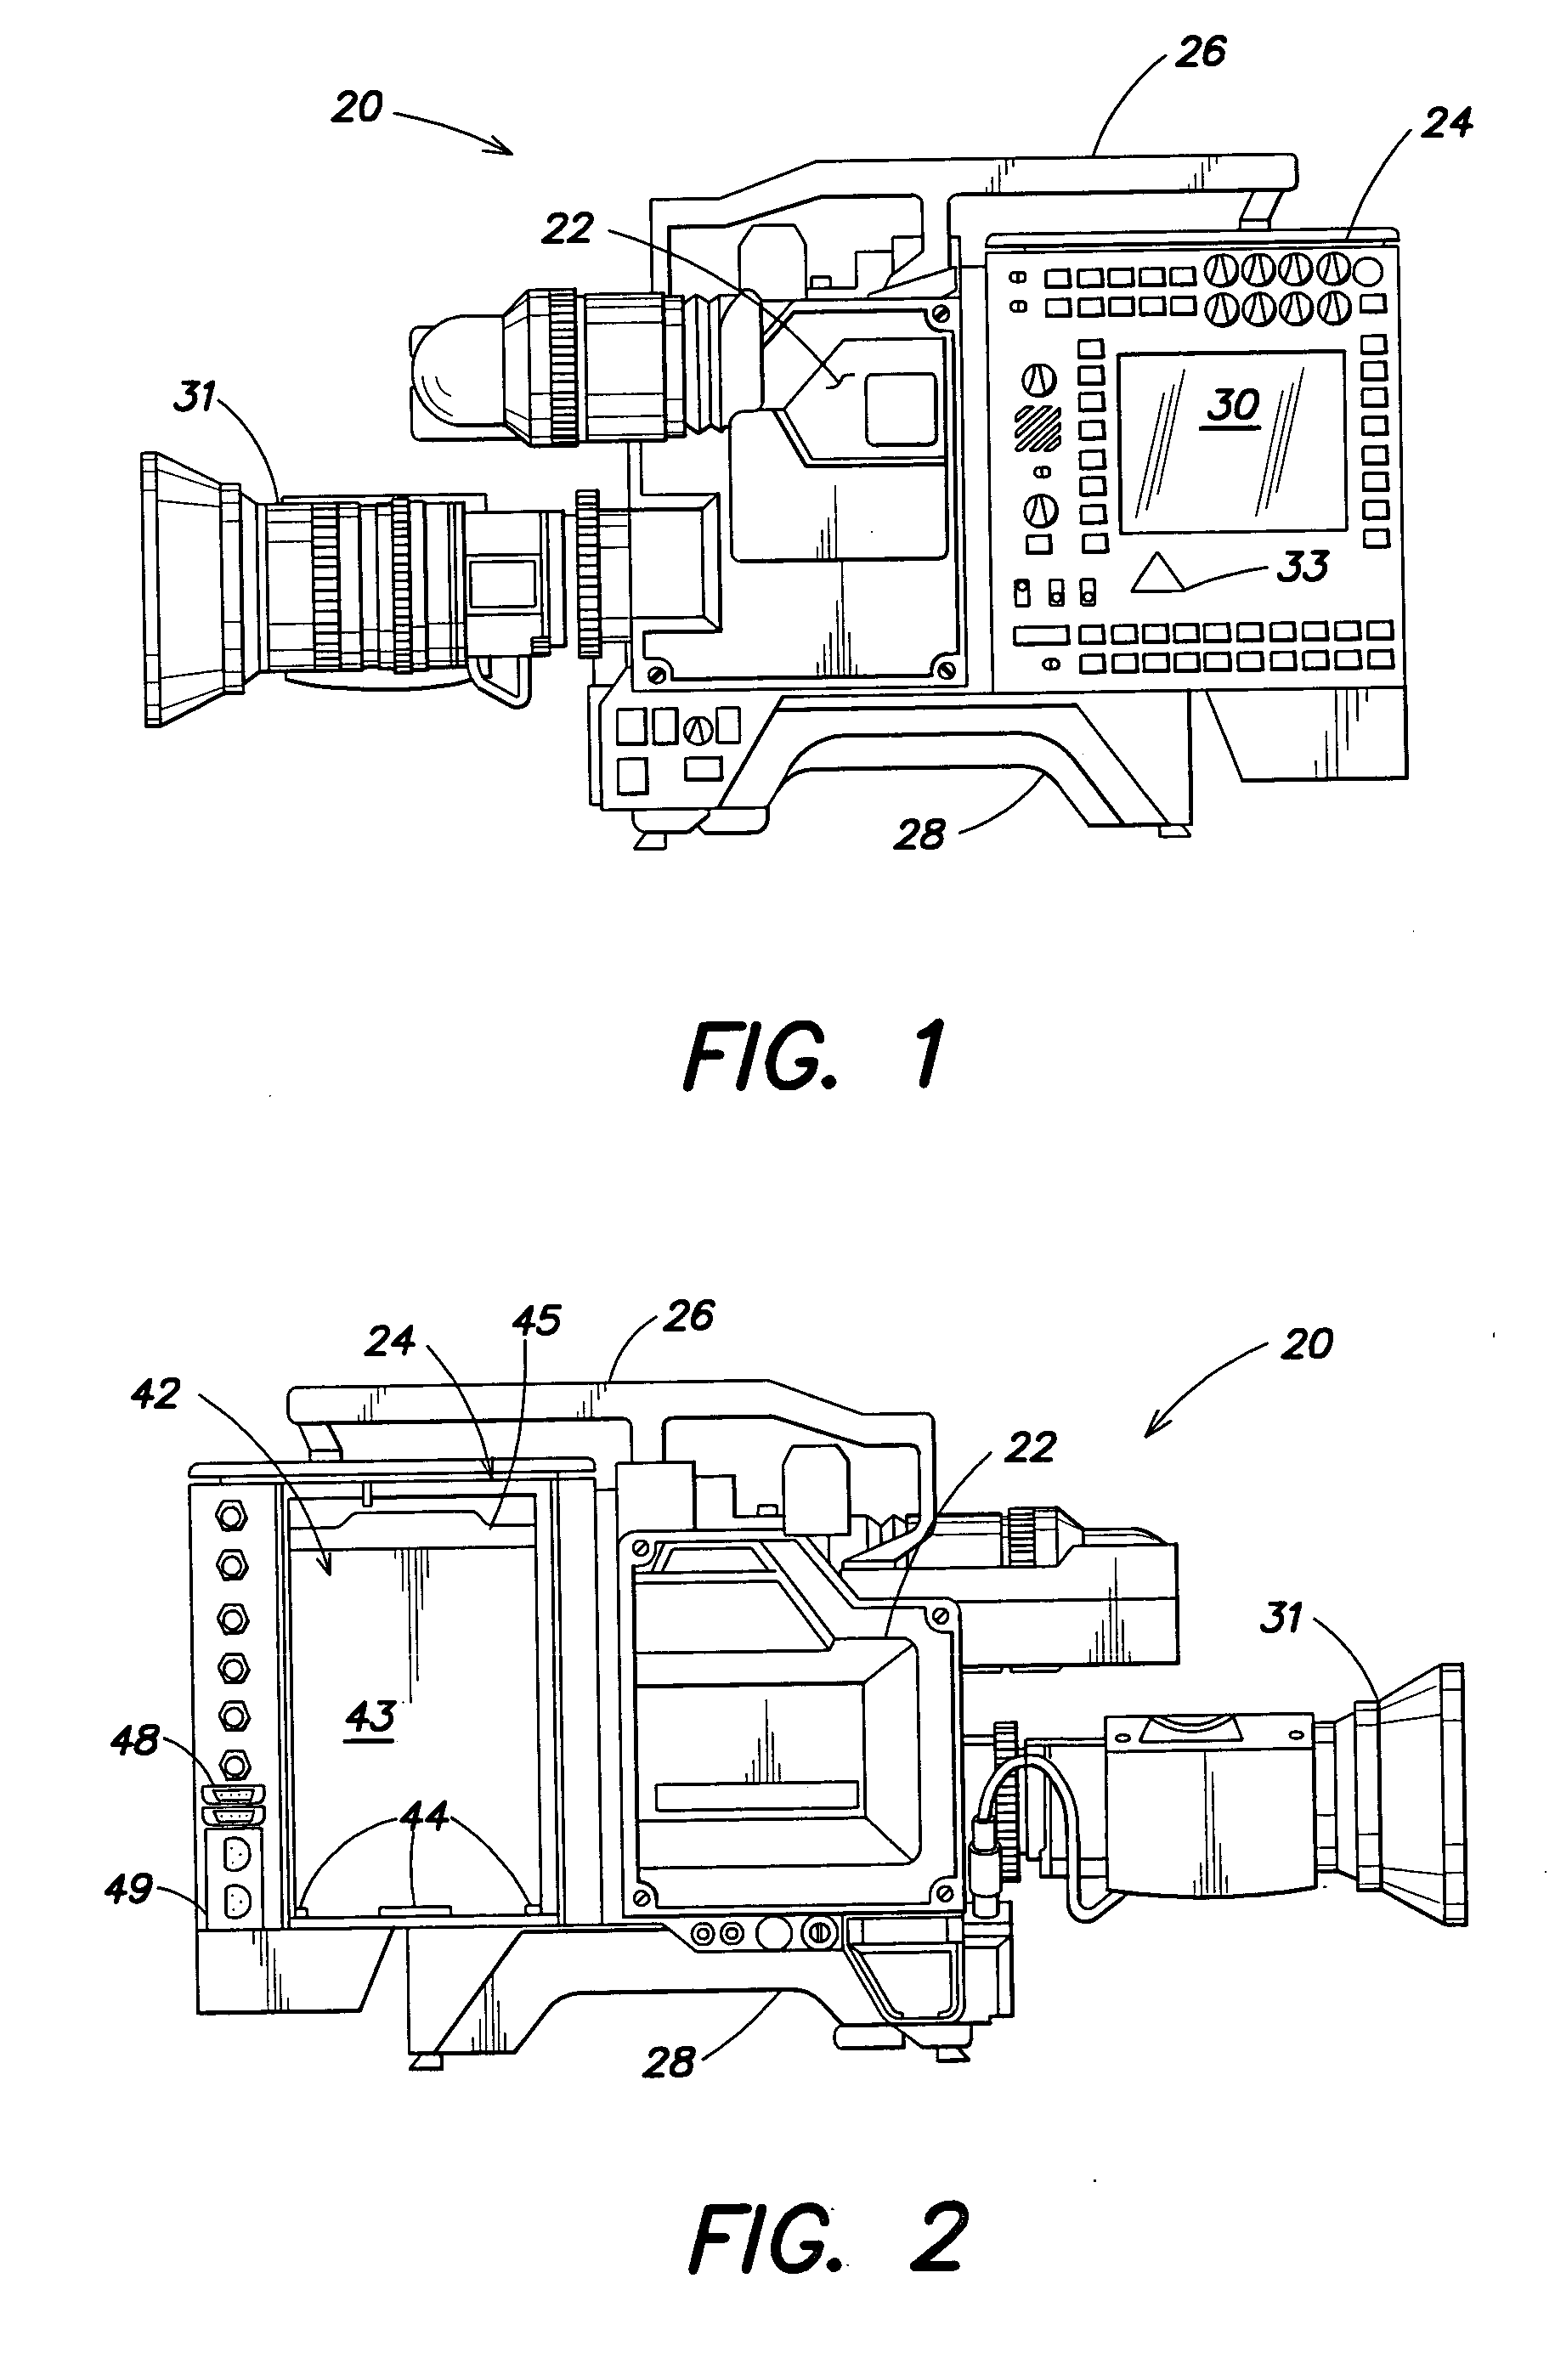 Combined editing system and digital moving picture recording system